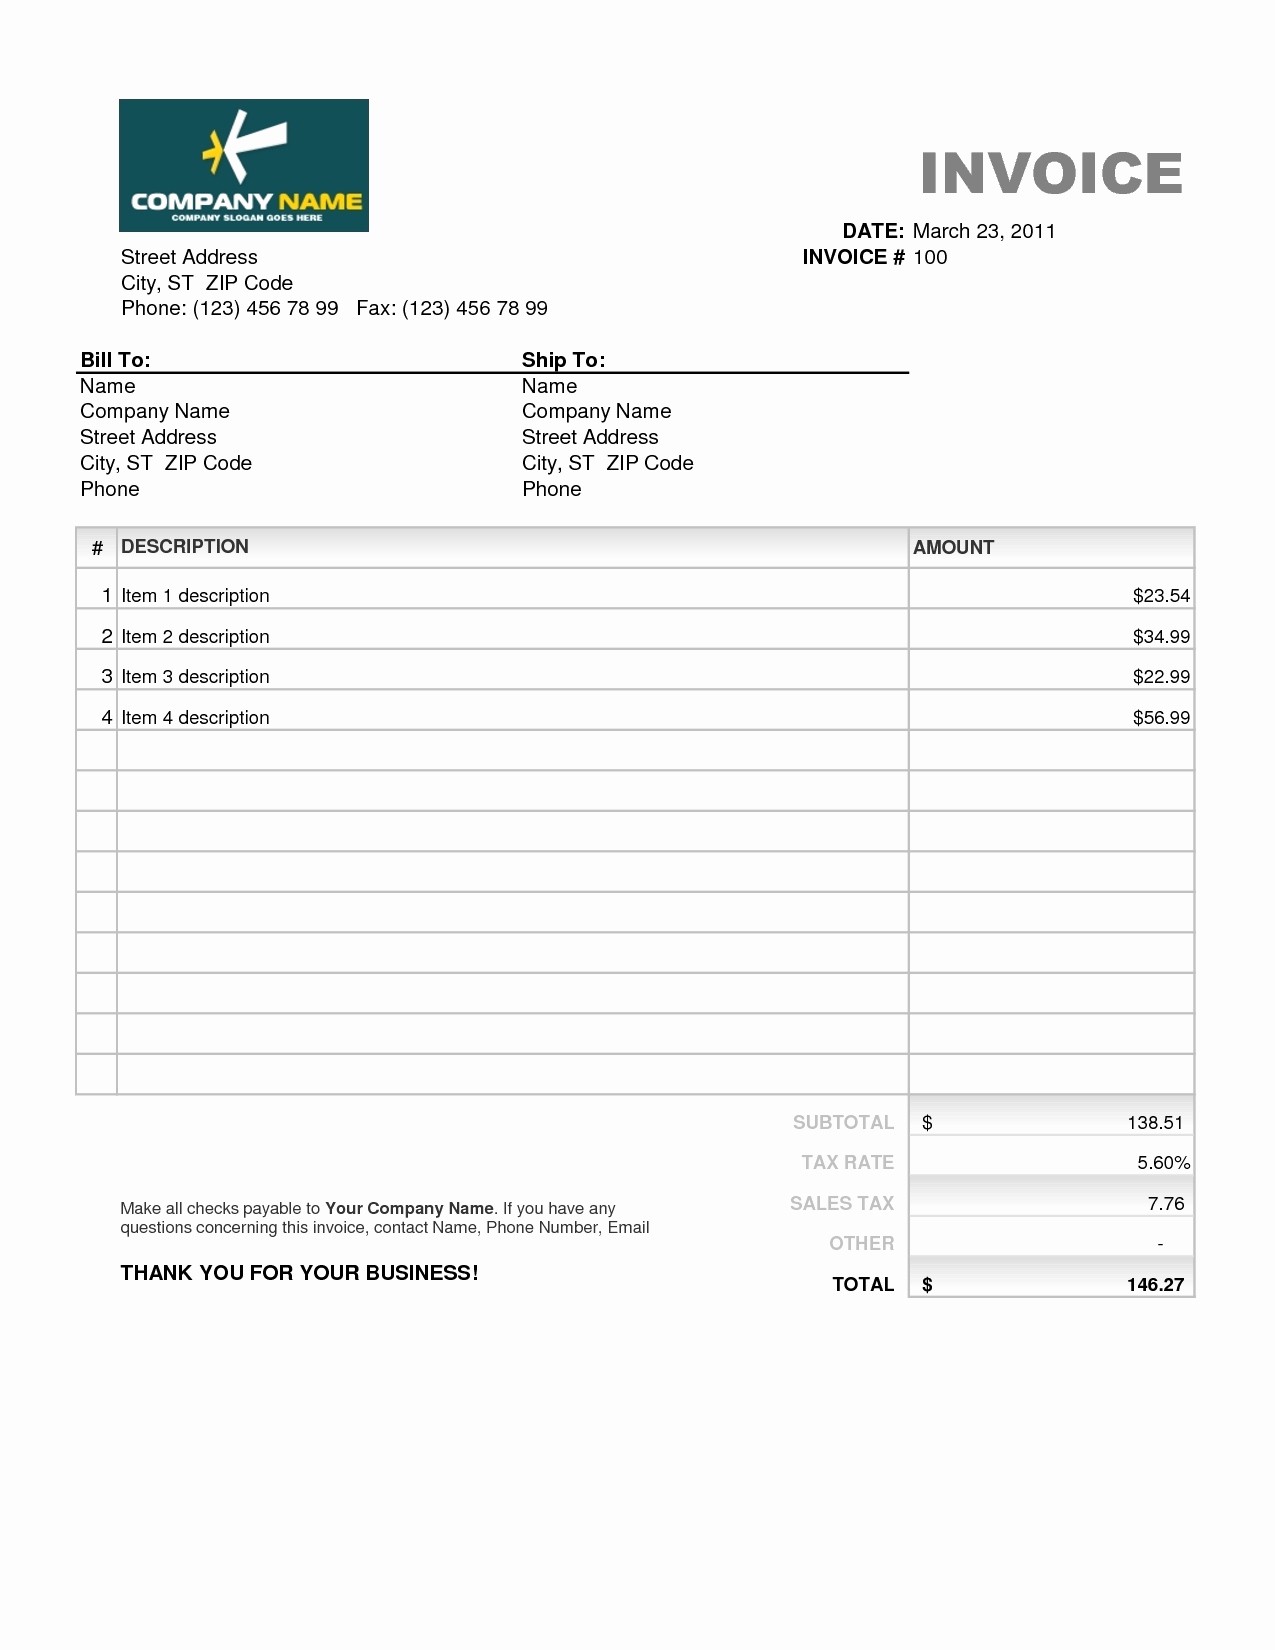 Excel Invoice Template with Logo Elegant Trucking Invoice Template Portablegasgrillweber